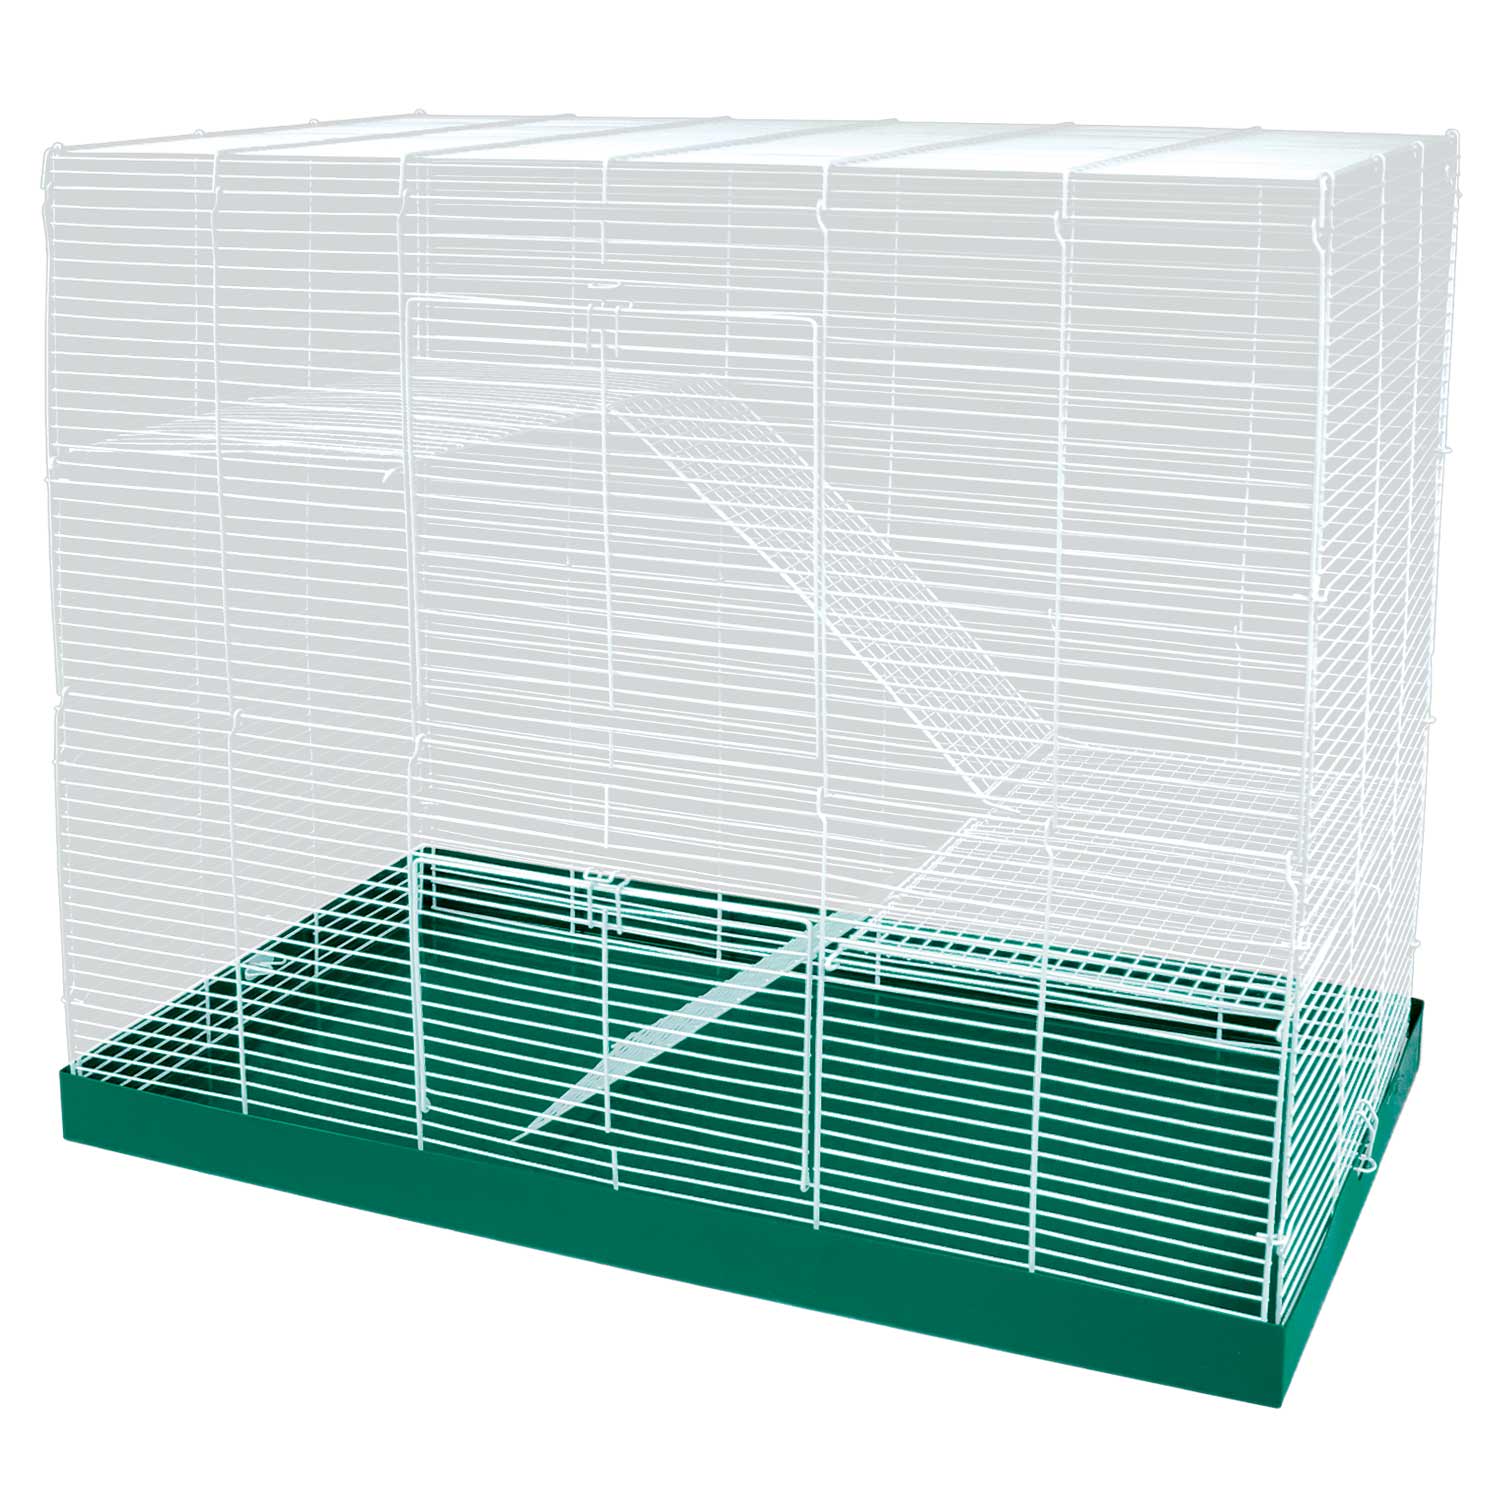 UPC 791611006658 product image for WARE Chew Proof Three Level Small Animal Critter Cage, 15.75 IN, Blue / White | upcitemdb.com